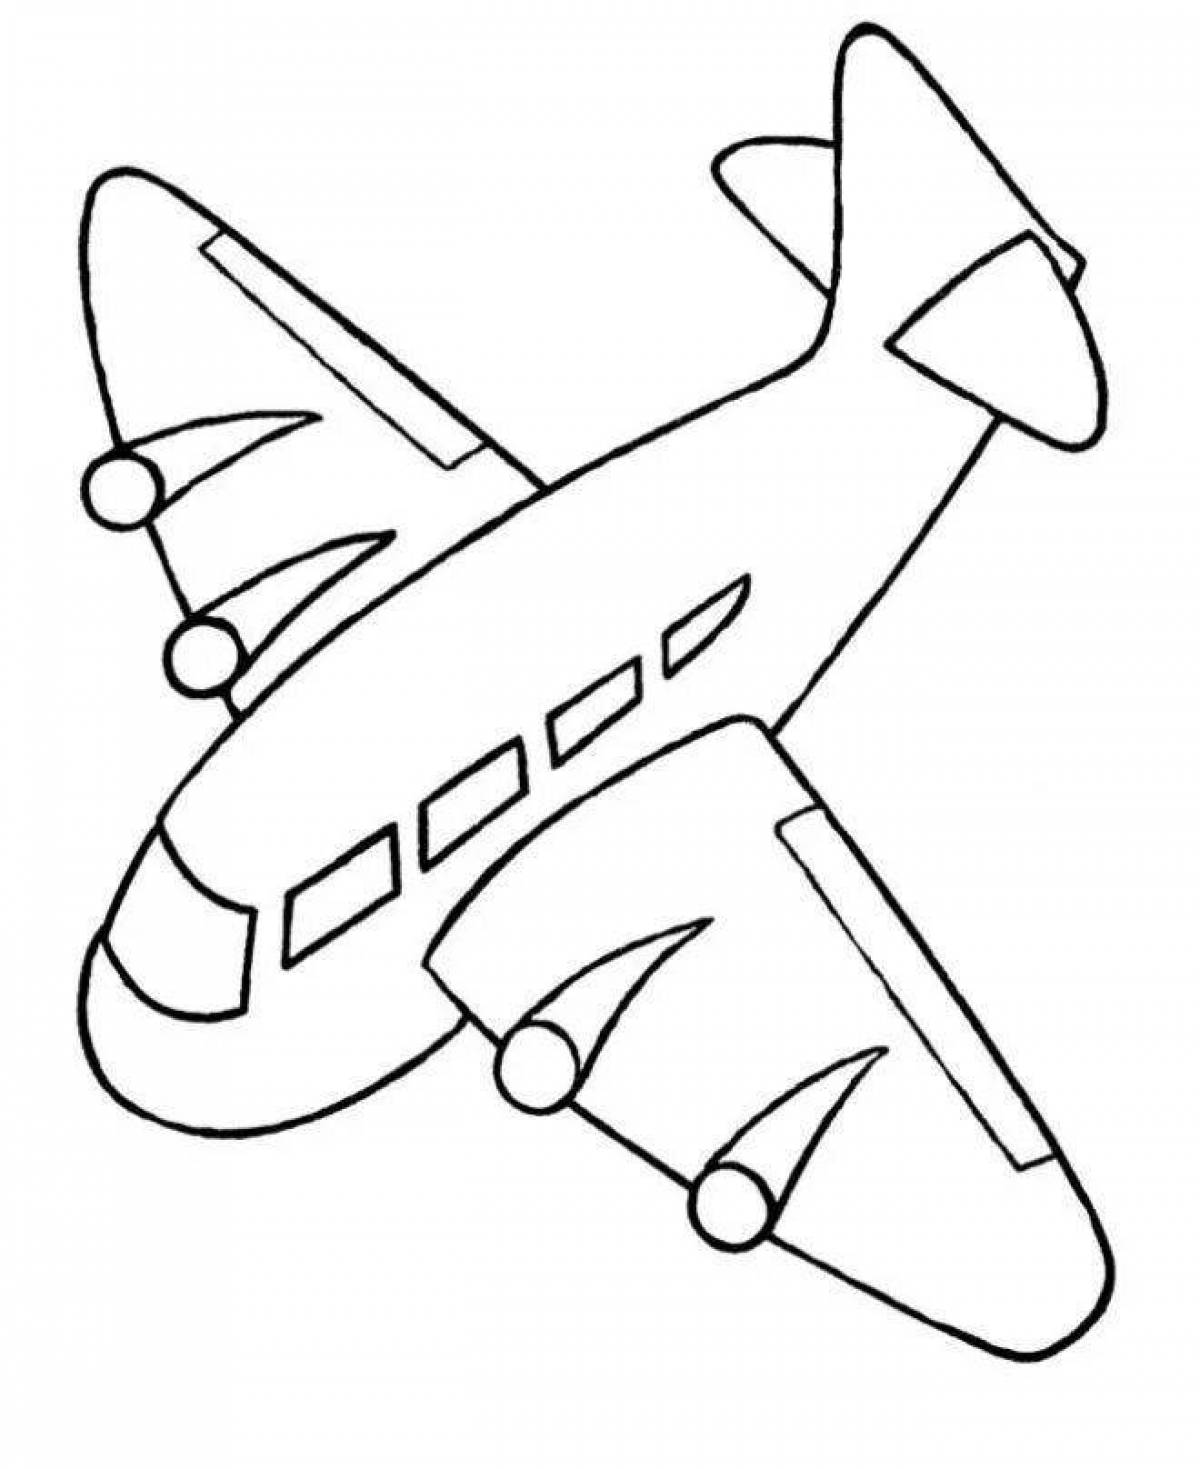 A coloring page with a bright pattern of an airplane